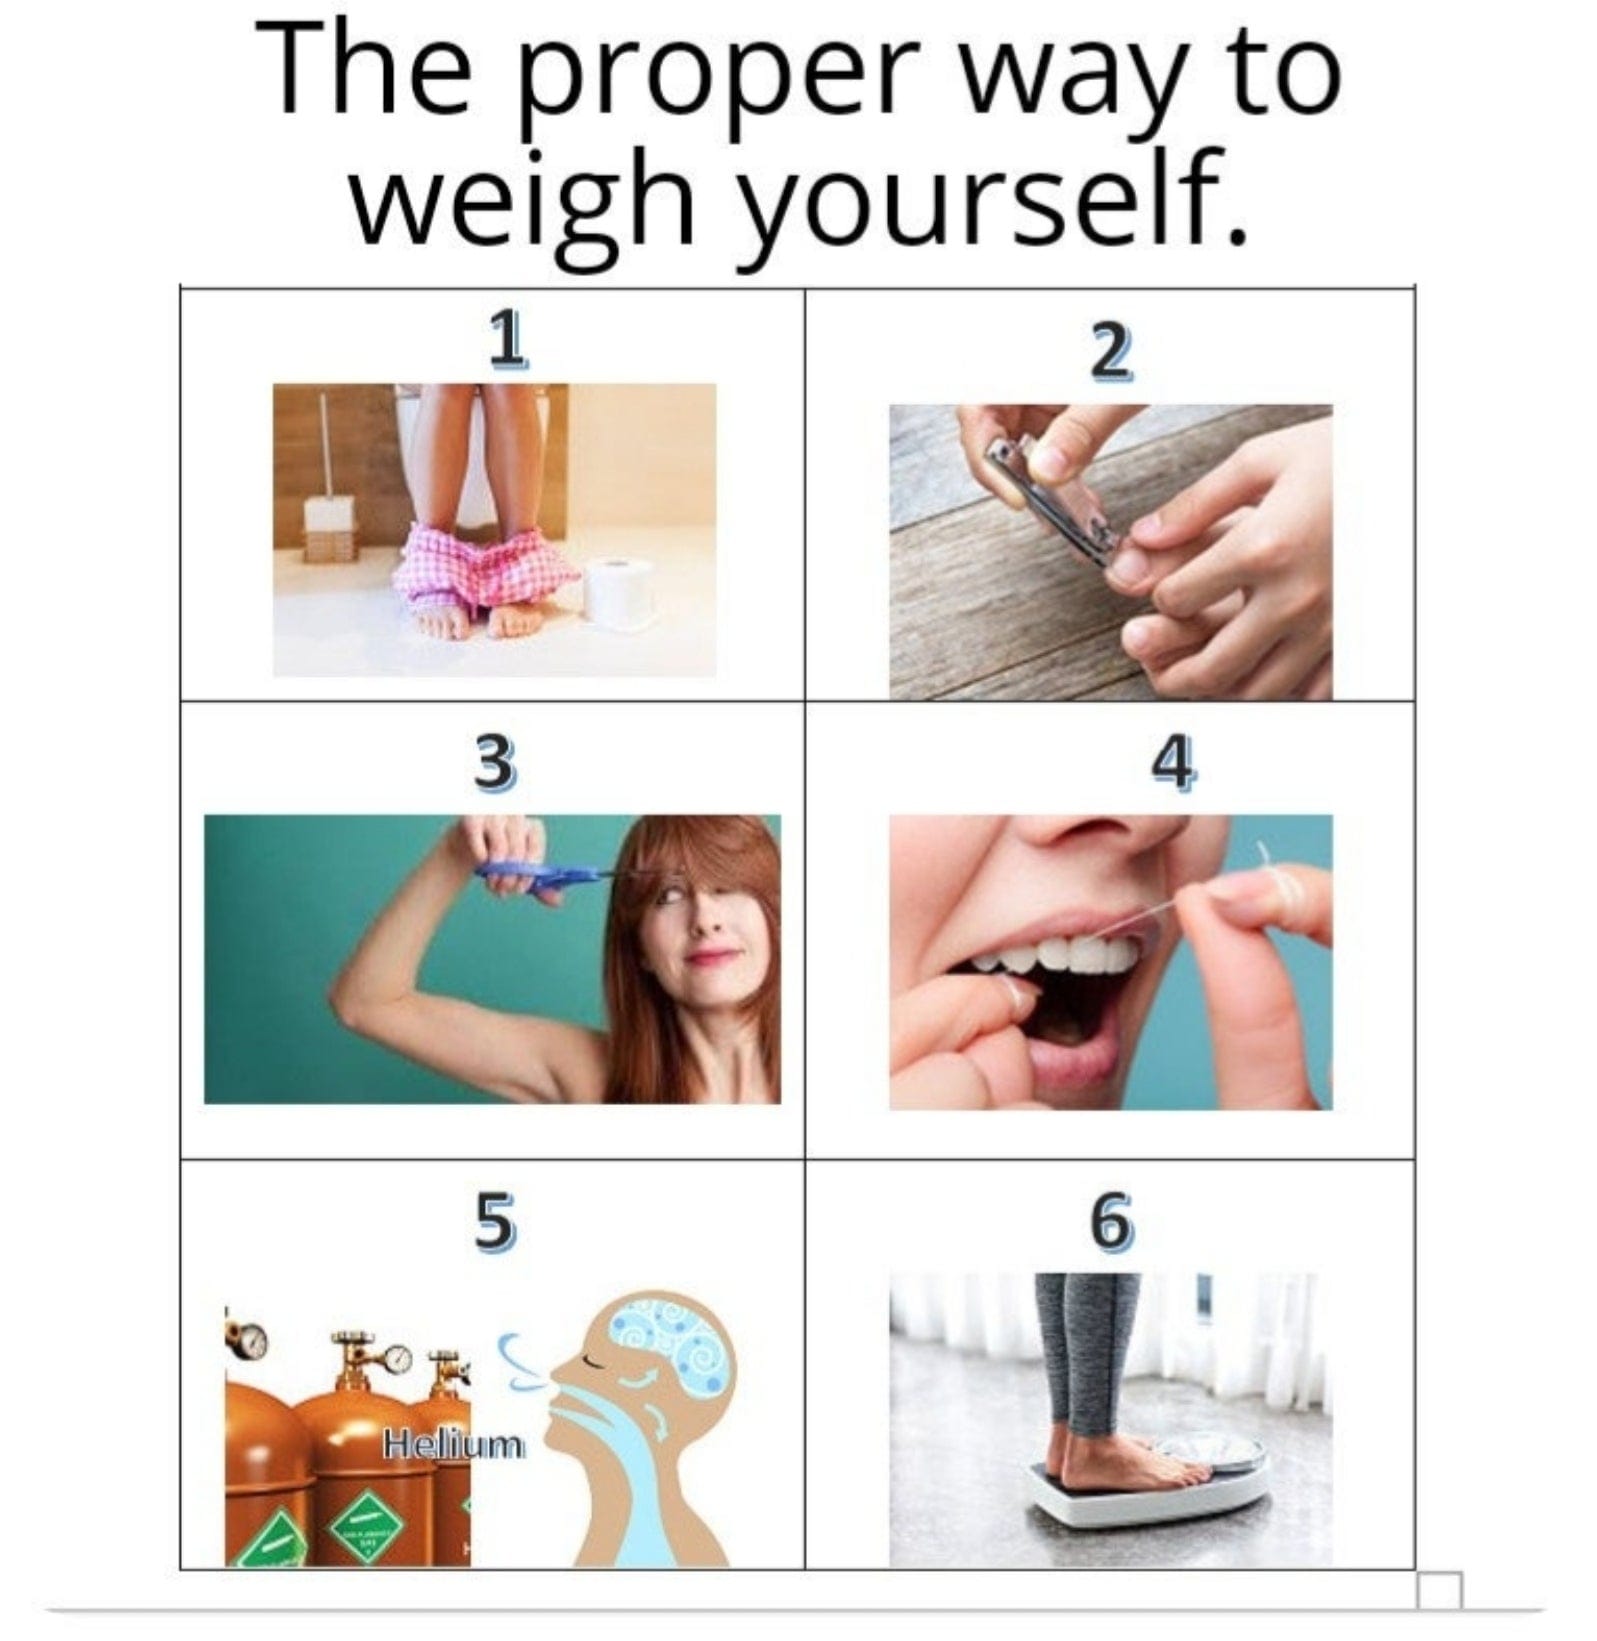 The proper way to weigh yourself